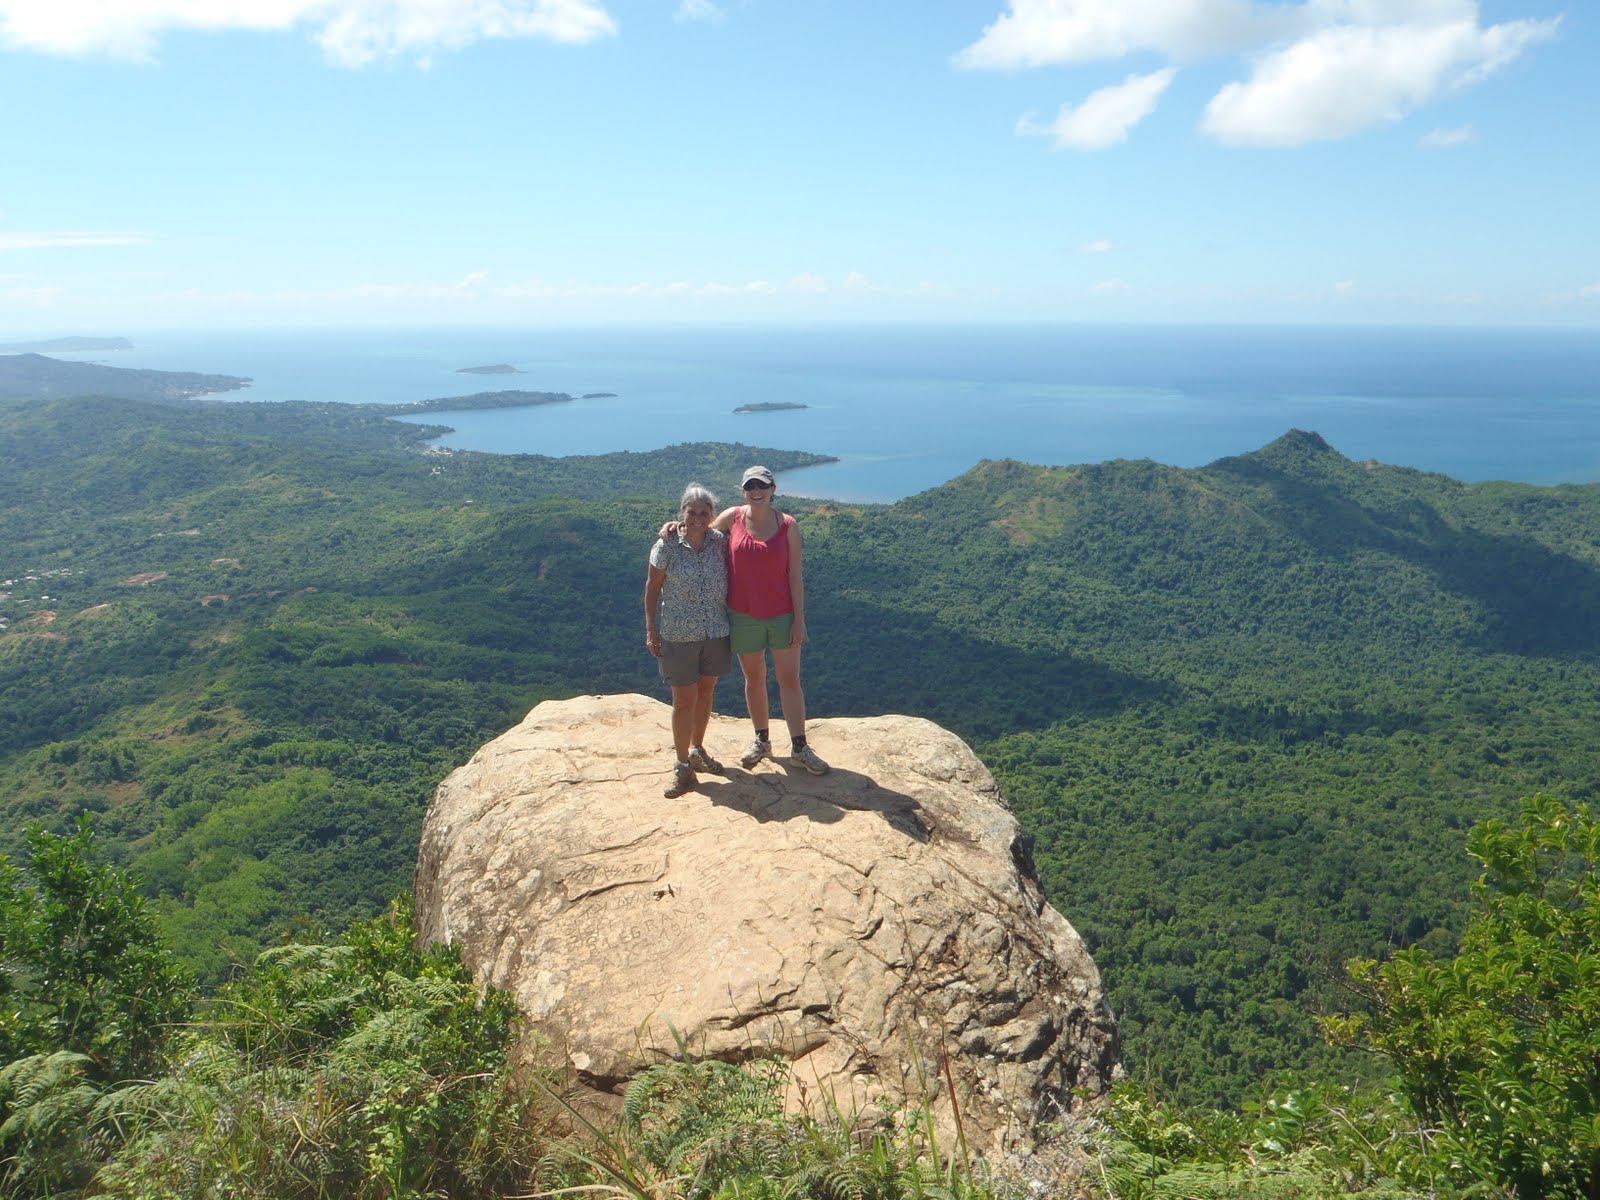 Hiking to Mont Choungui on the island of Mayotte - A must to do there!